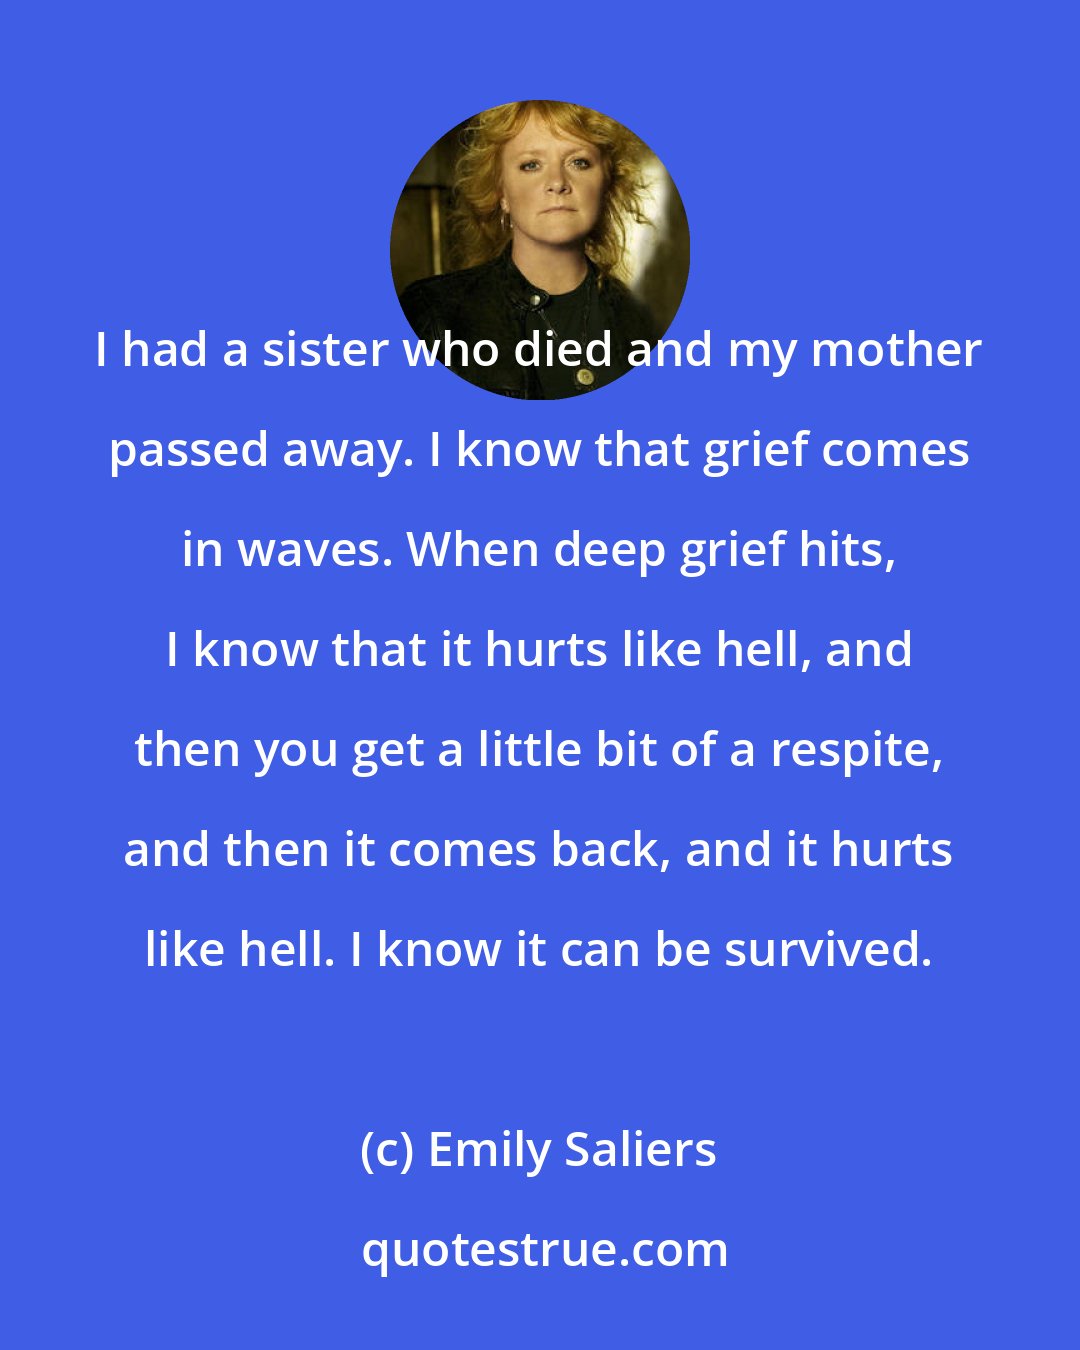 Emily Saliers: I had a sister who died and my mother passed away. I know that grief comes in waves. When deep grief hits, I know that it hurts like hell, and then you get a little bit of a respite, and then it comes back, and it hurts like hell. I know it can be survived.